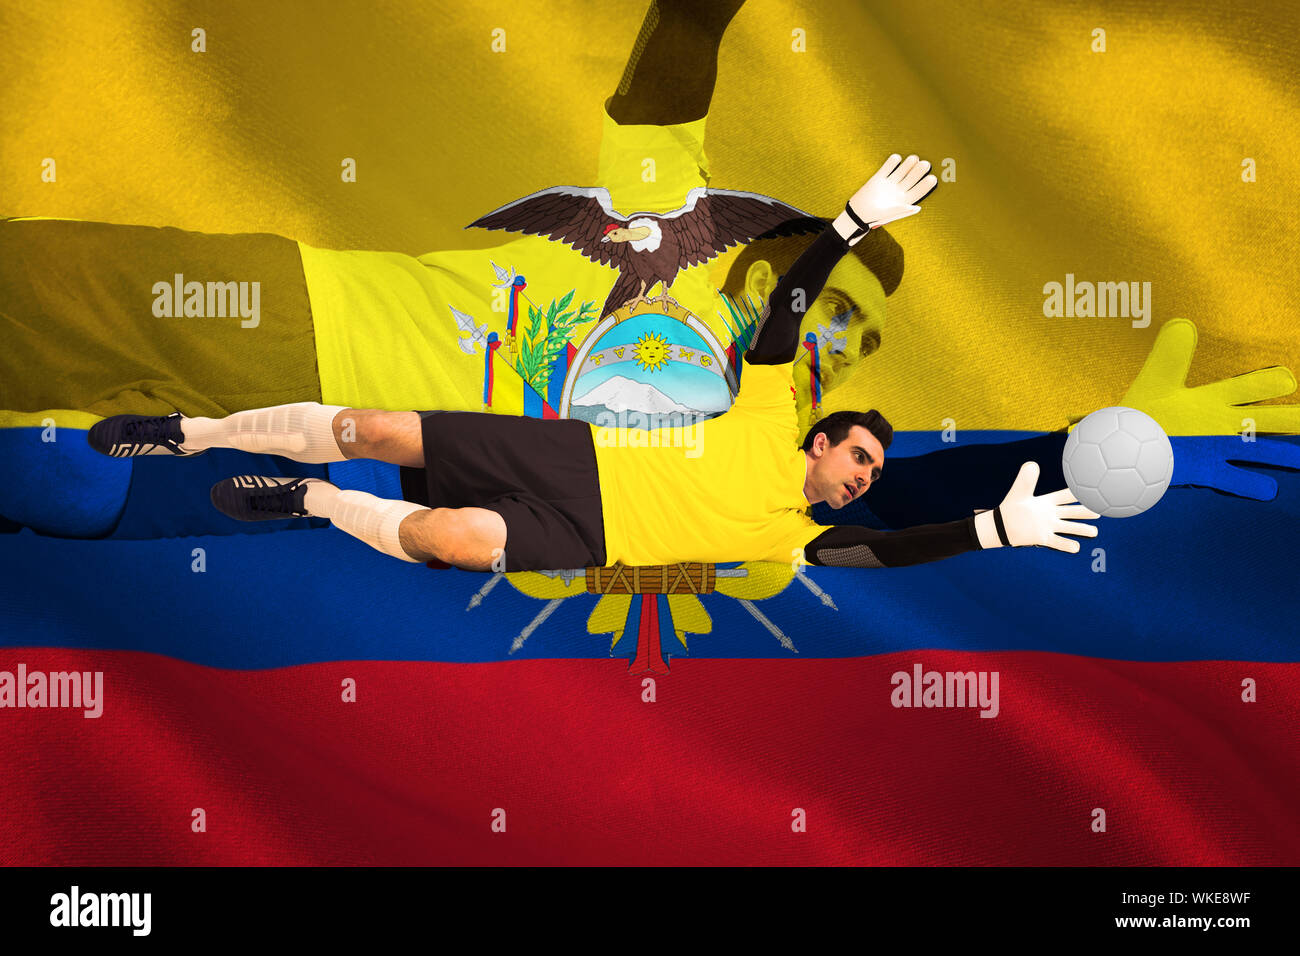 Goalkeeper in yellow making a save against digitally generated ecuador national flag Stock Photo